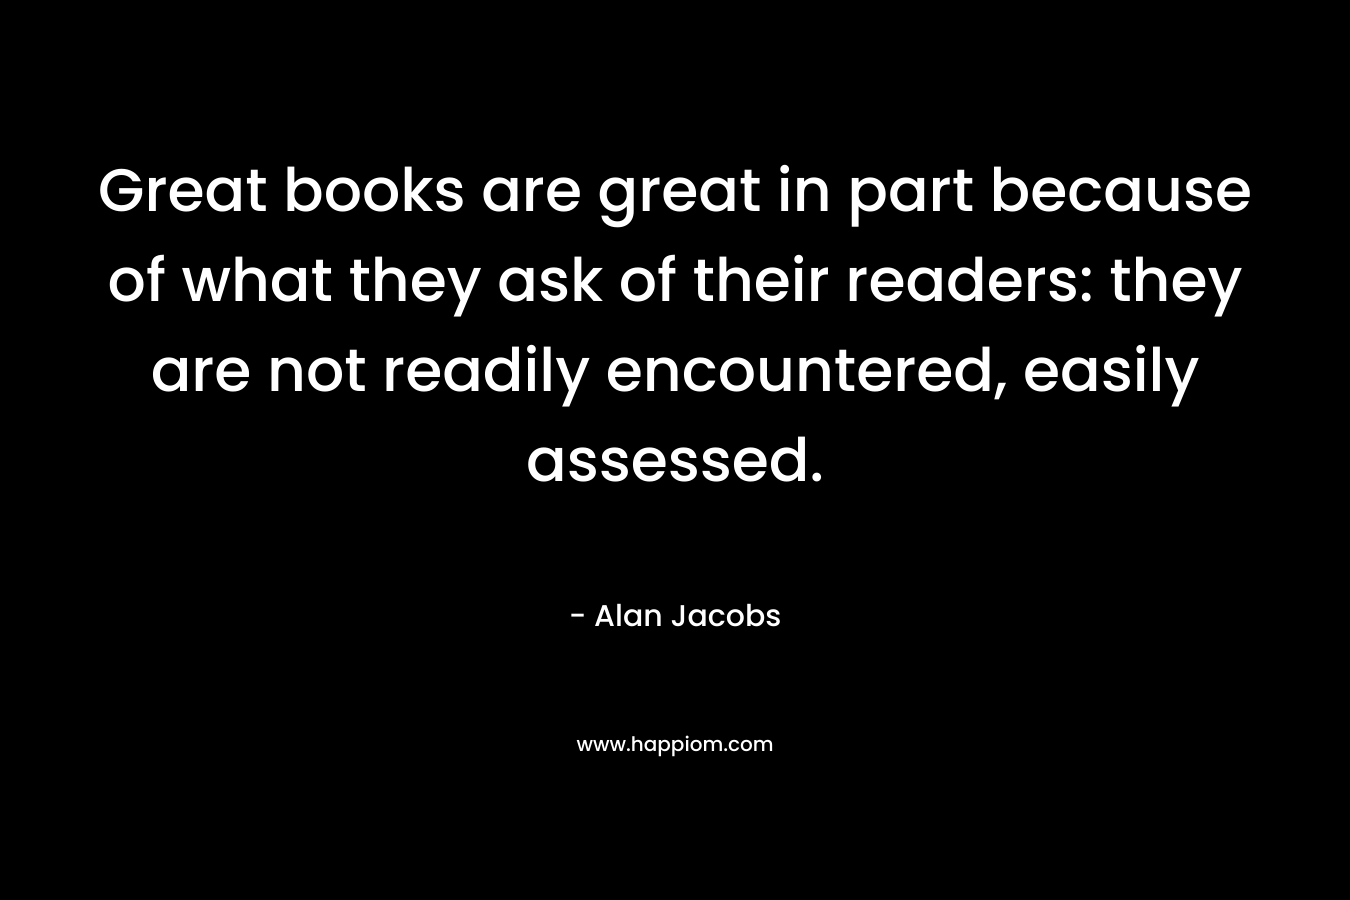 Great books are great in part because of what they ask of their readers: they are not readily encountered, easily assessed.